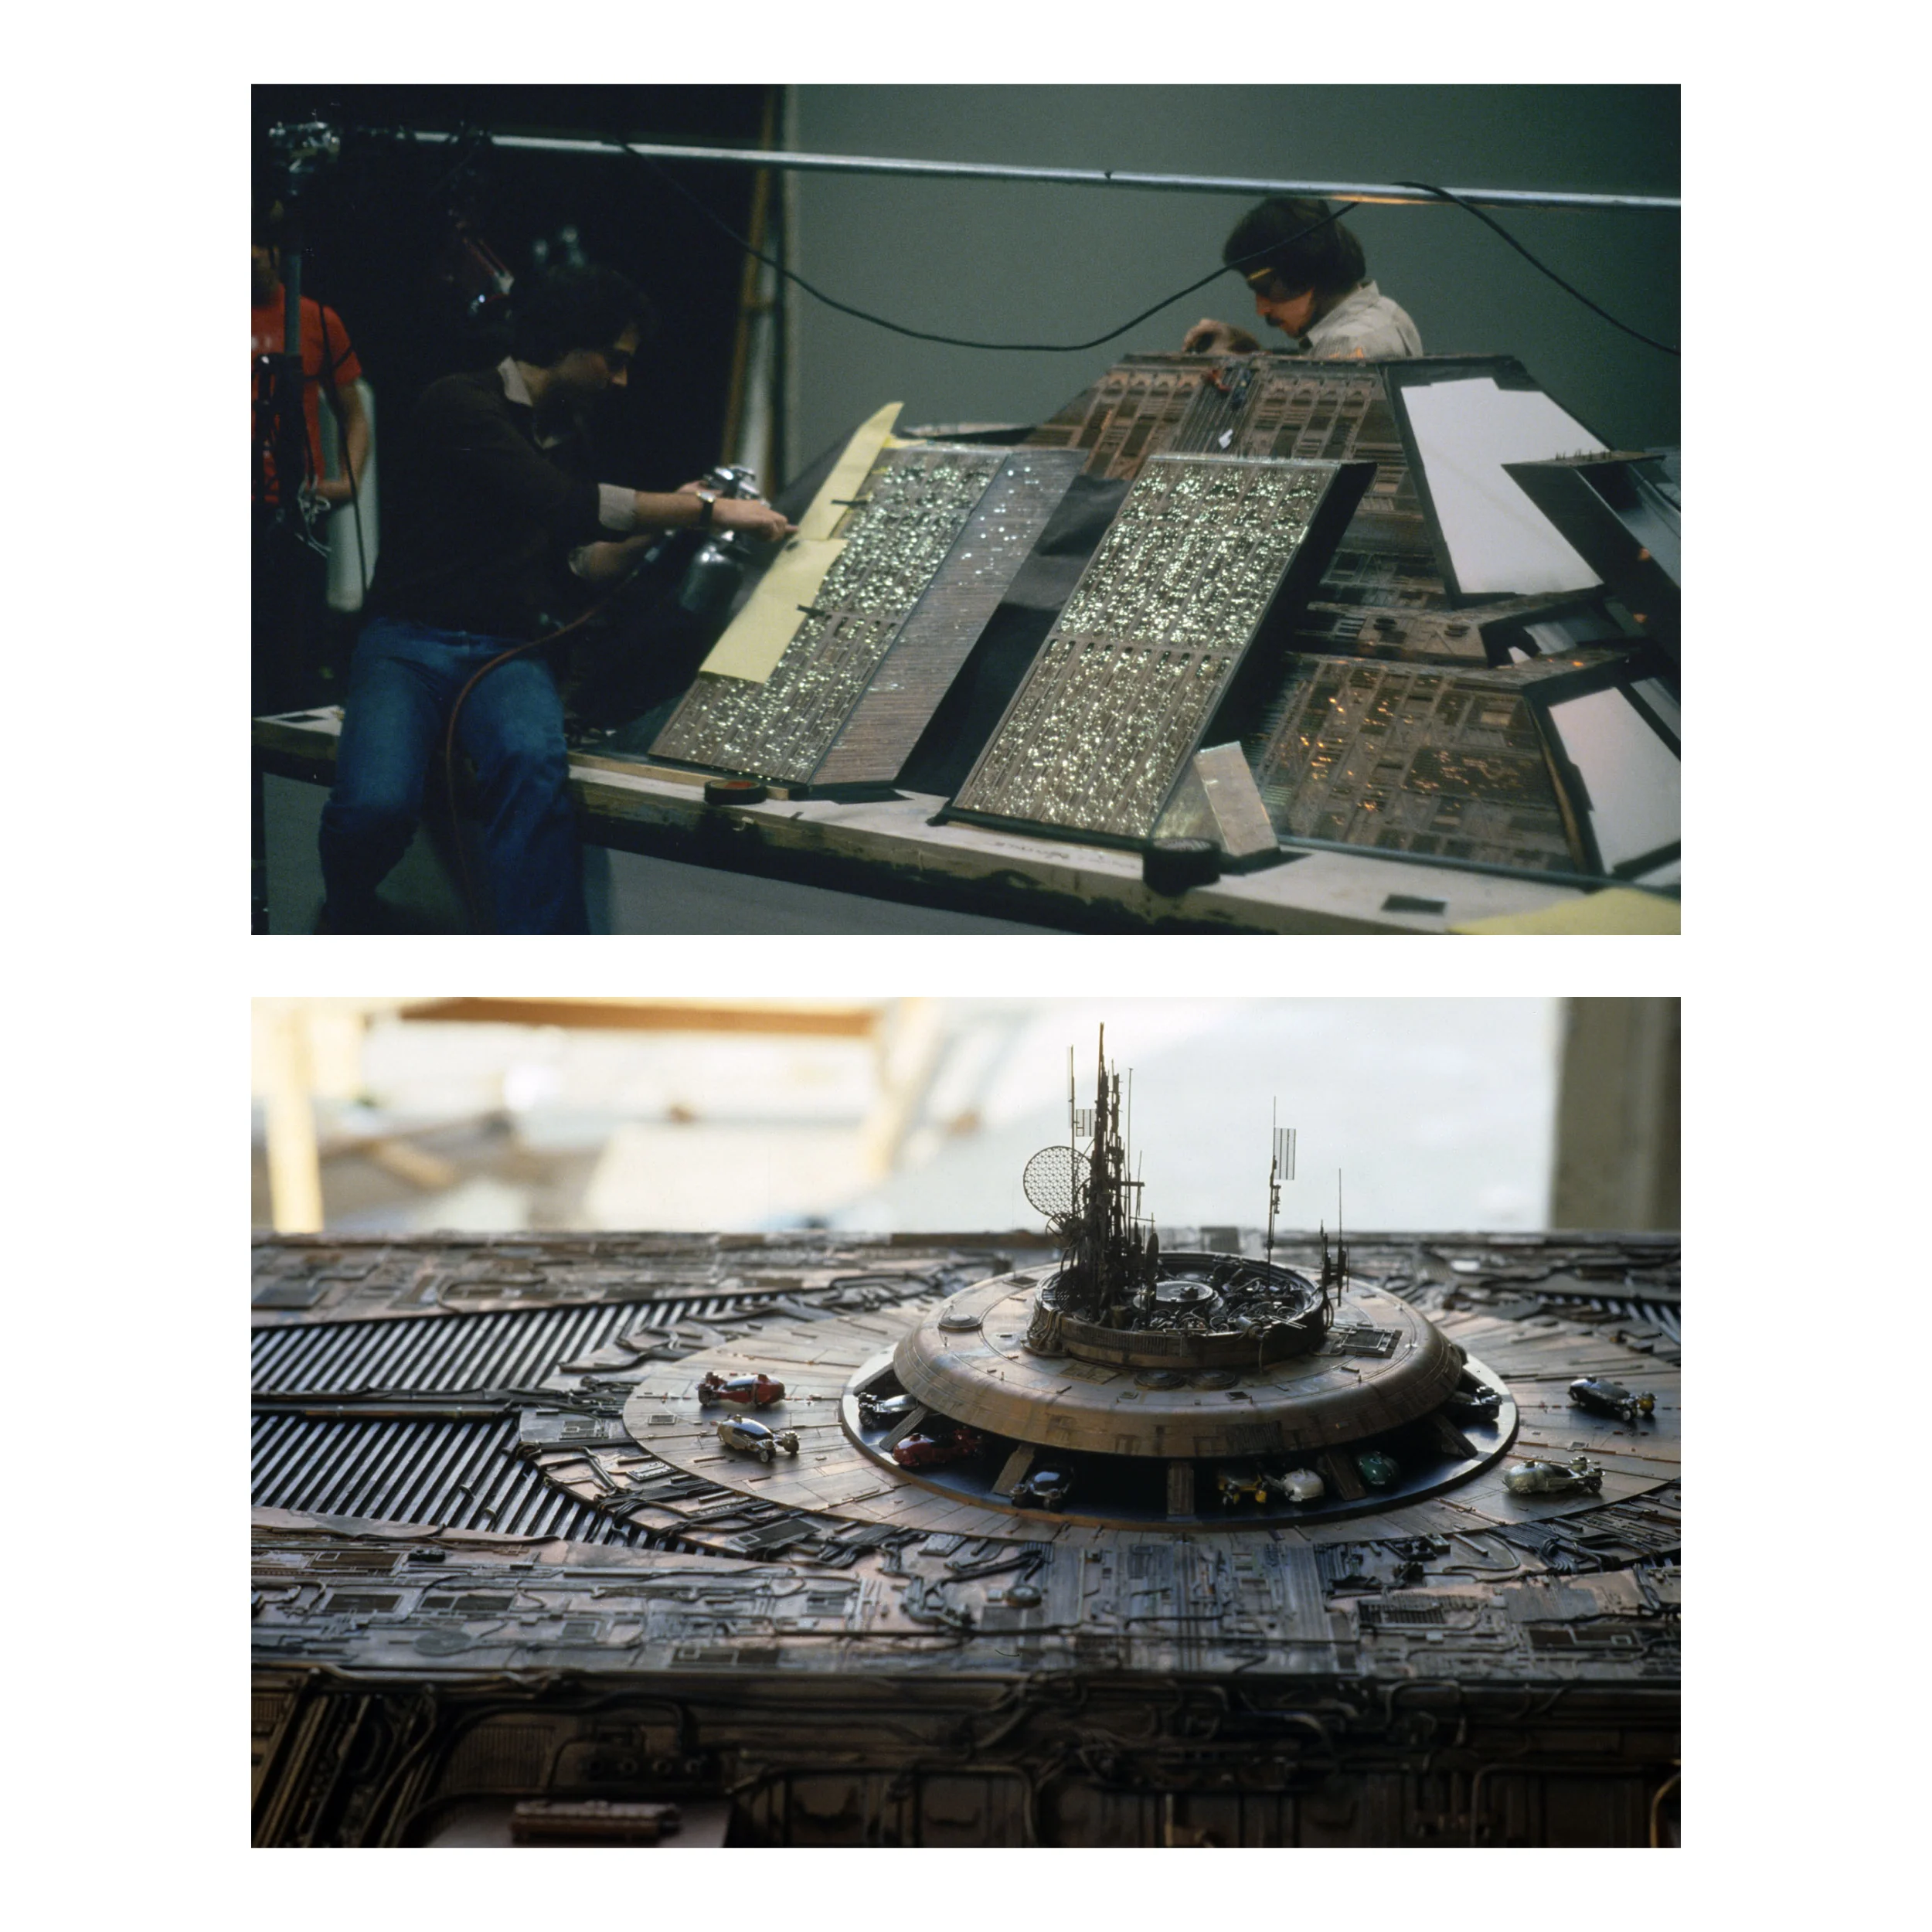 Images of the Tyrell Corp building model with the set designers working on it.